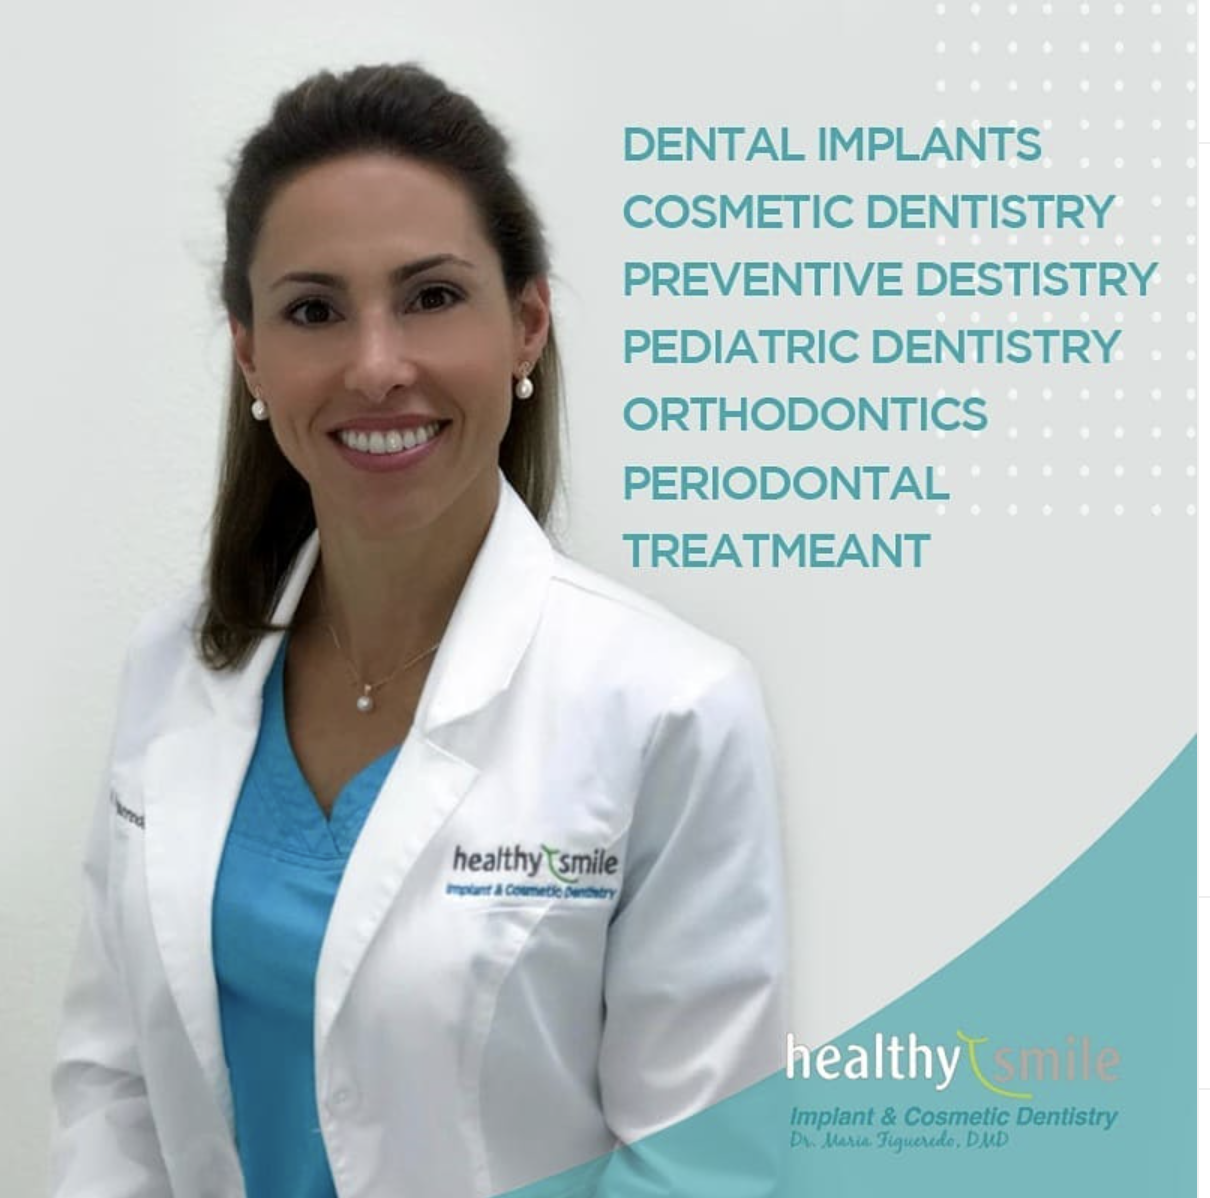 Healthy Smile & Implant & Cosmetic Dentistry